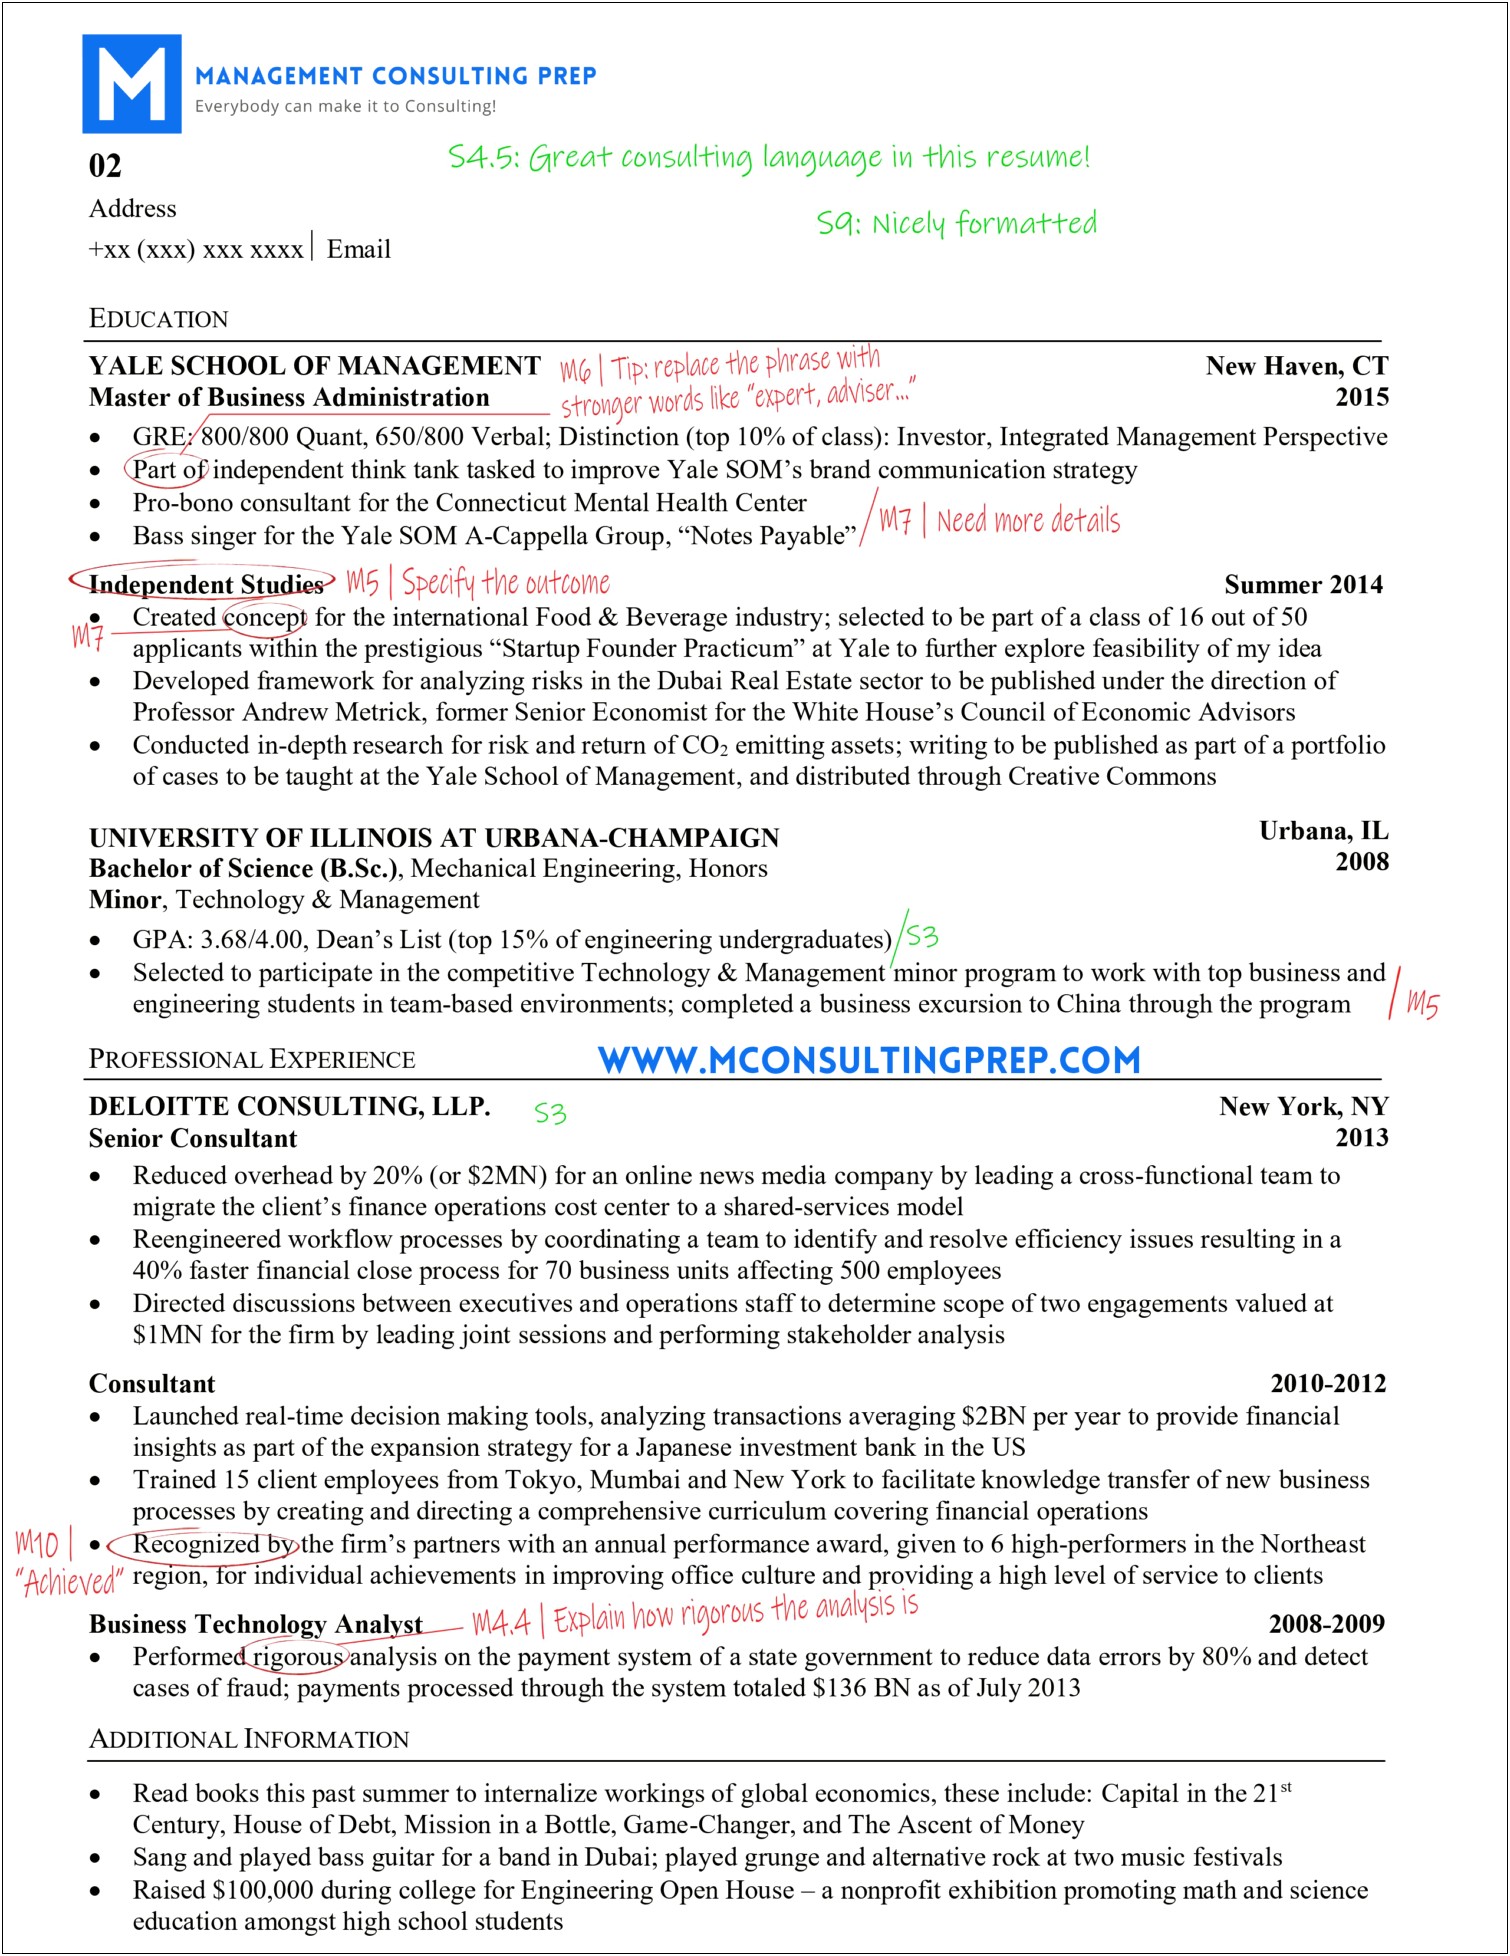 Using Sales Experience For Consulting Resume